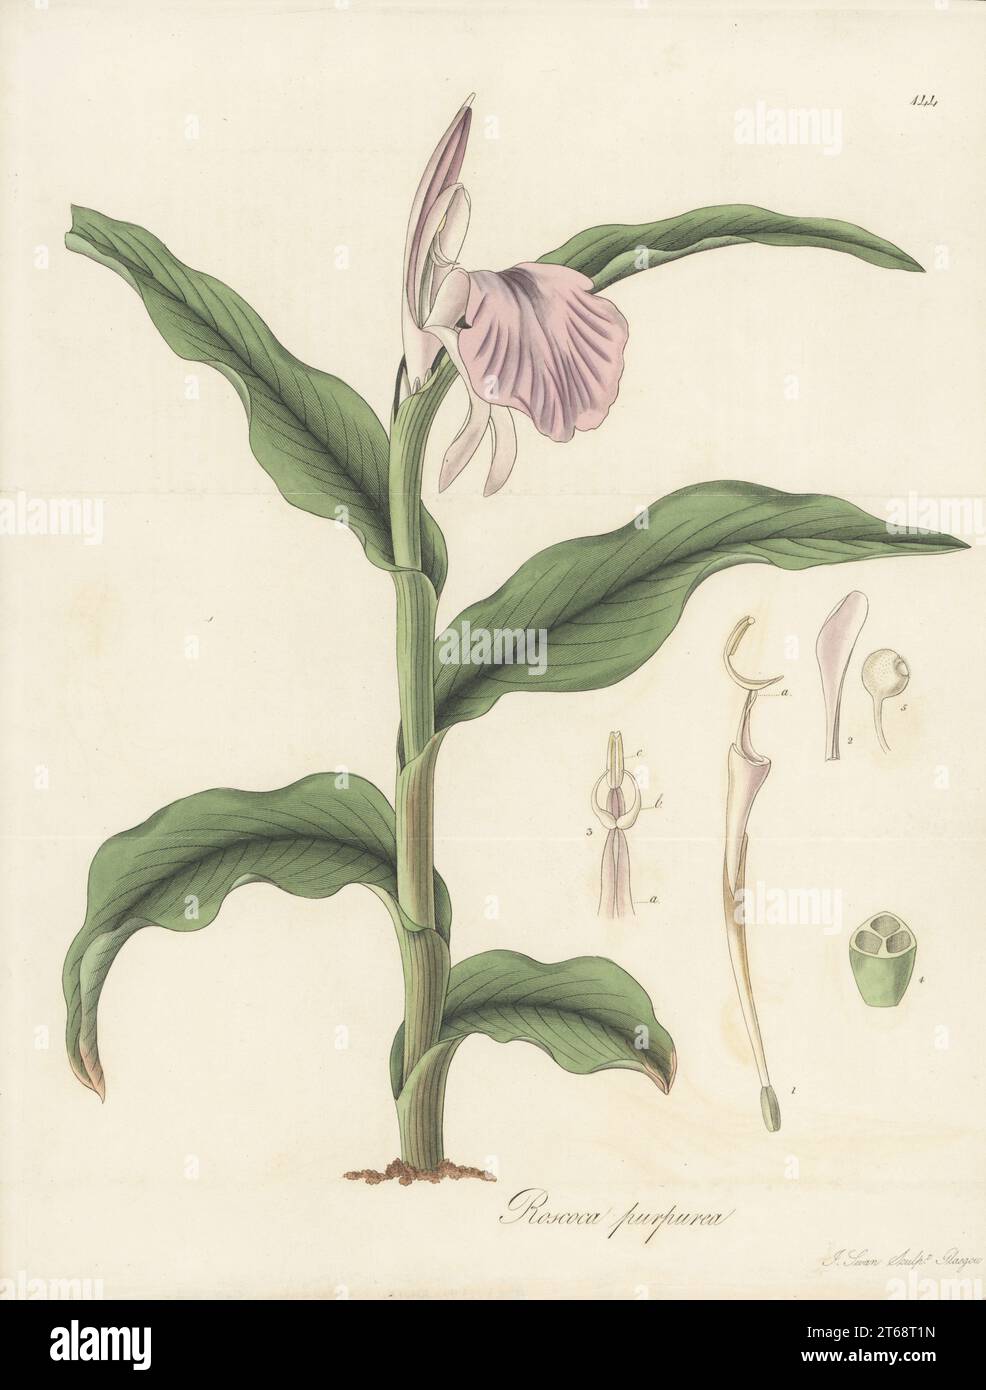 Purple roscoea, Roscoea purpurea. Ginger species (Zingiberaceae) native to the Himalayas and Nepal. Handcoloured copperplate engraving by Joseph Swan after a botanical illustration by William Jackson Hooker from his Exotic Flora, William Blackwood, Edinburgh, 1823-27. Stock Photo